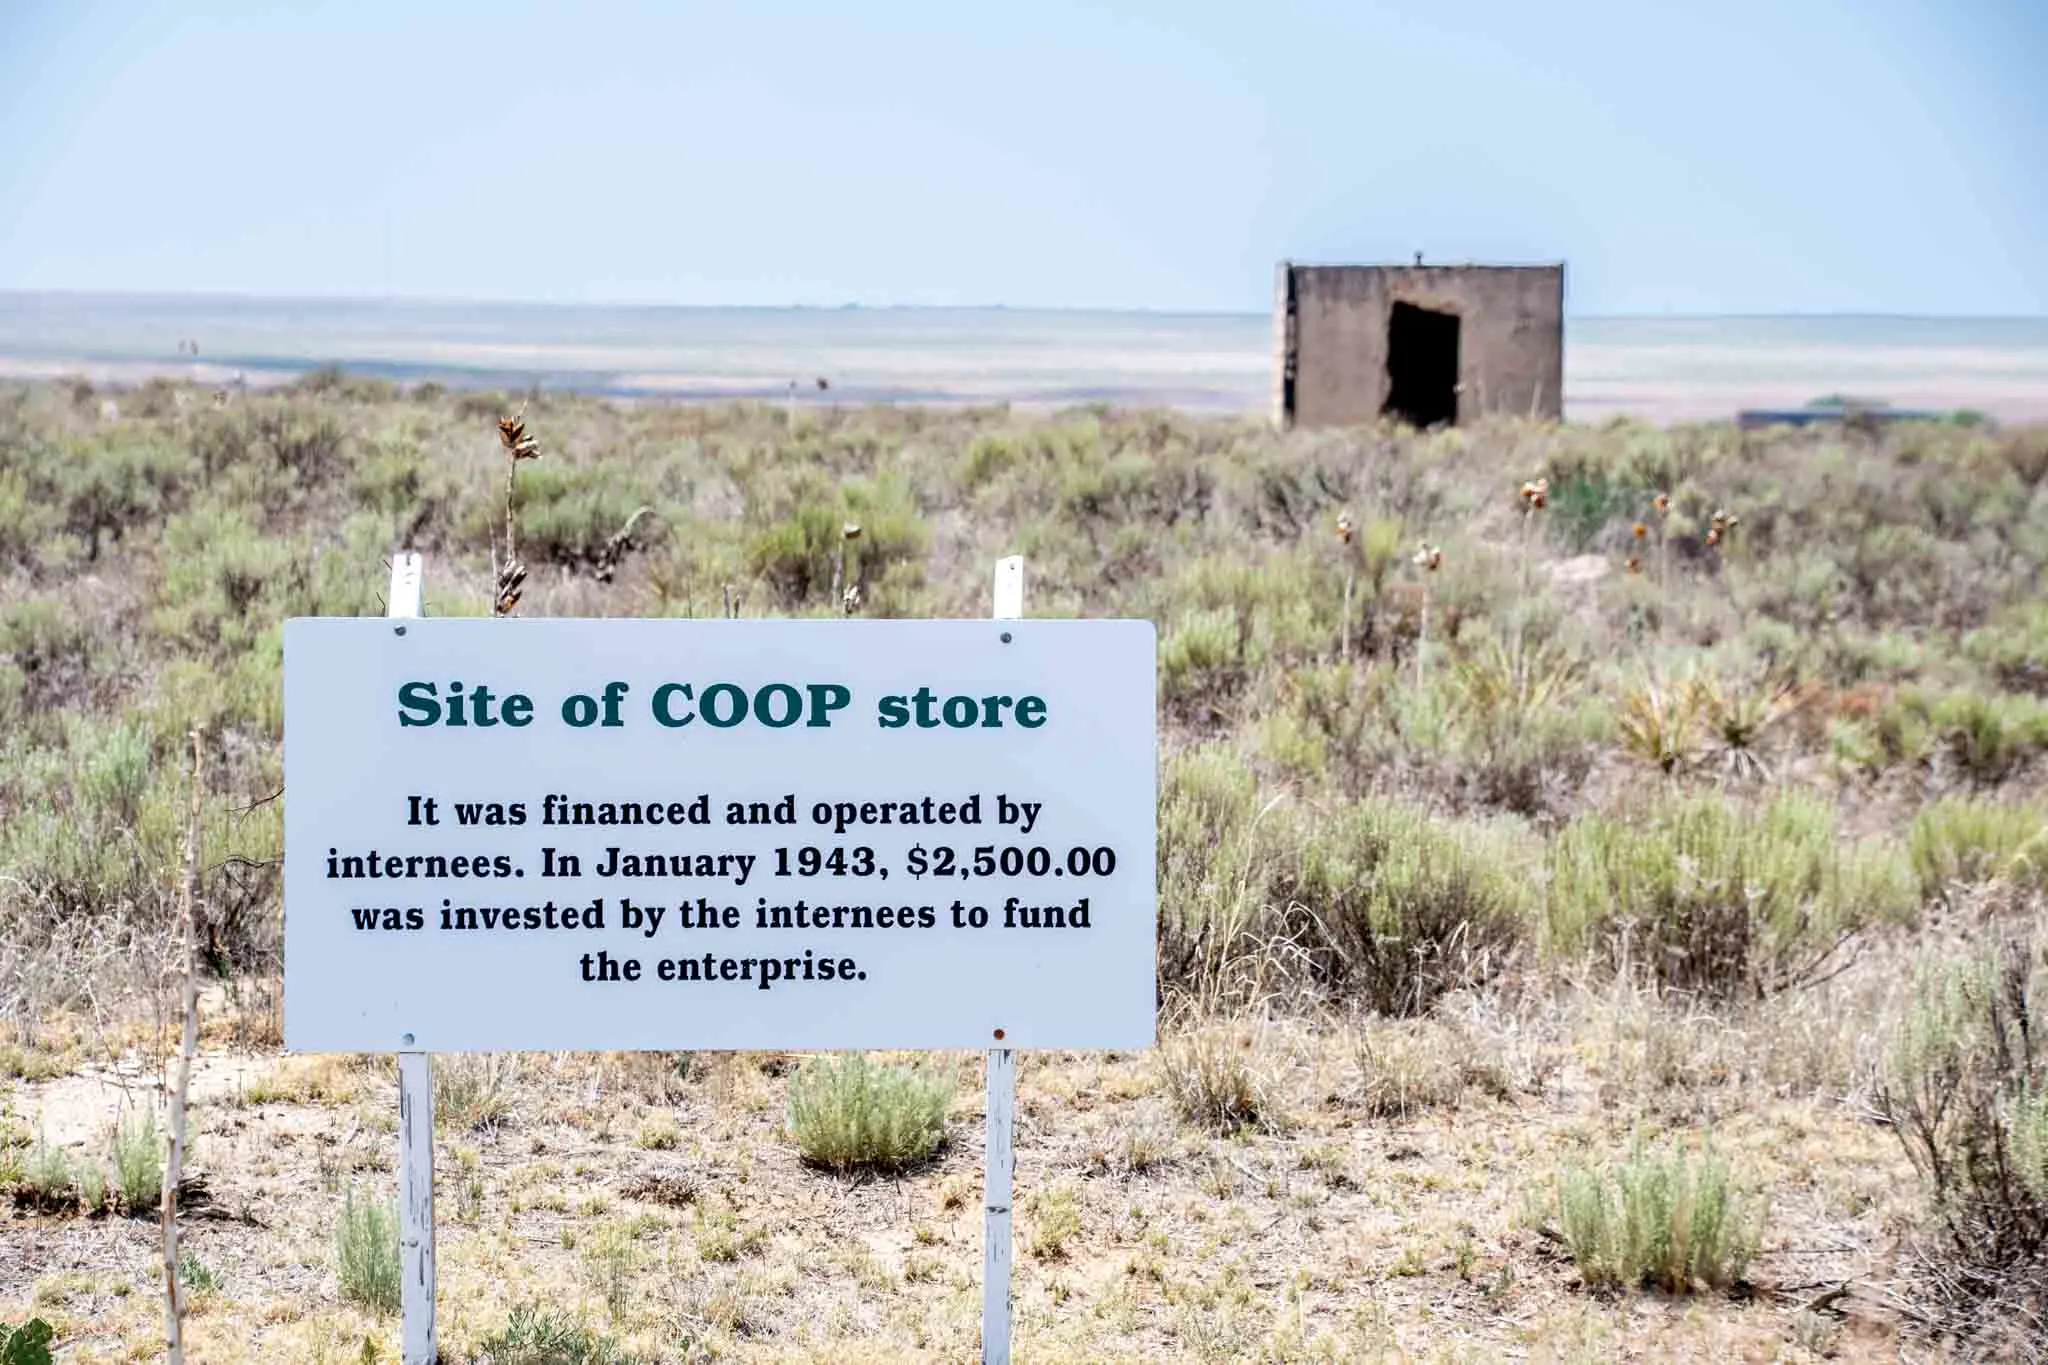 The coop storehouse and sign